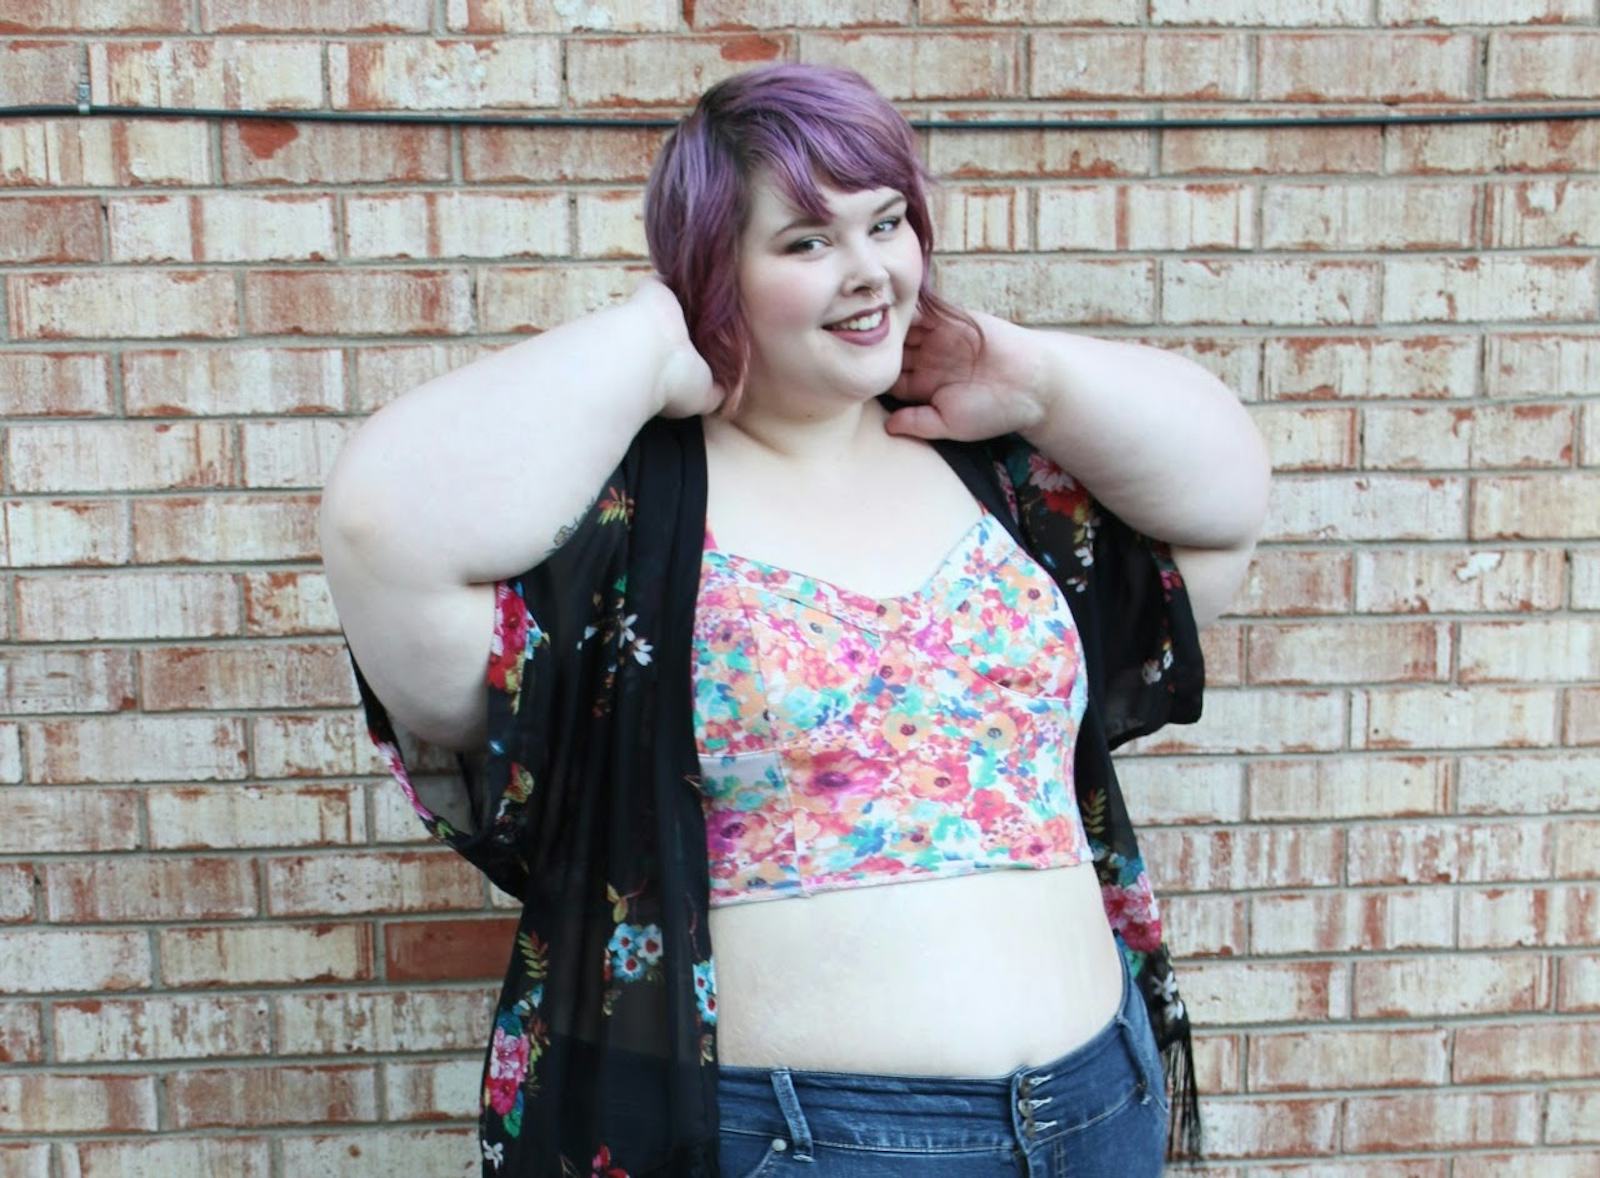 56 Photos Of Plus Size Individuals With Small Boobs Because Fat ... picture